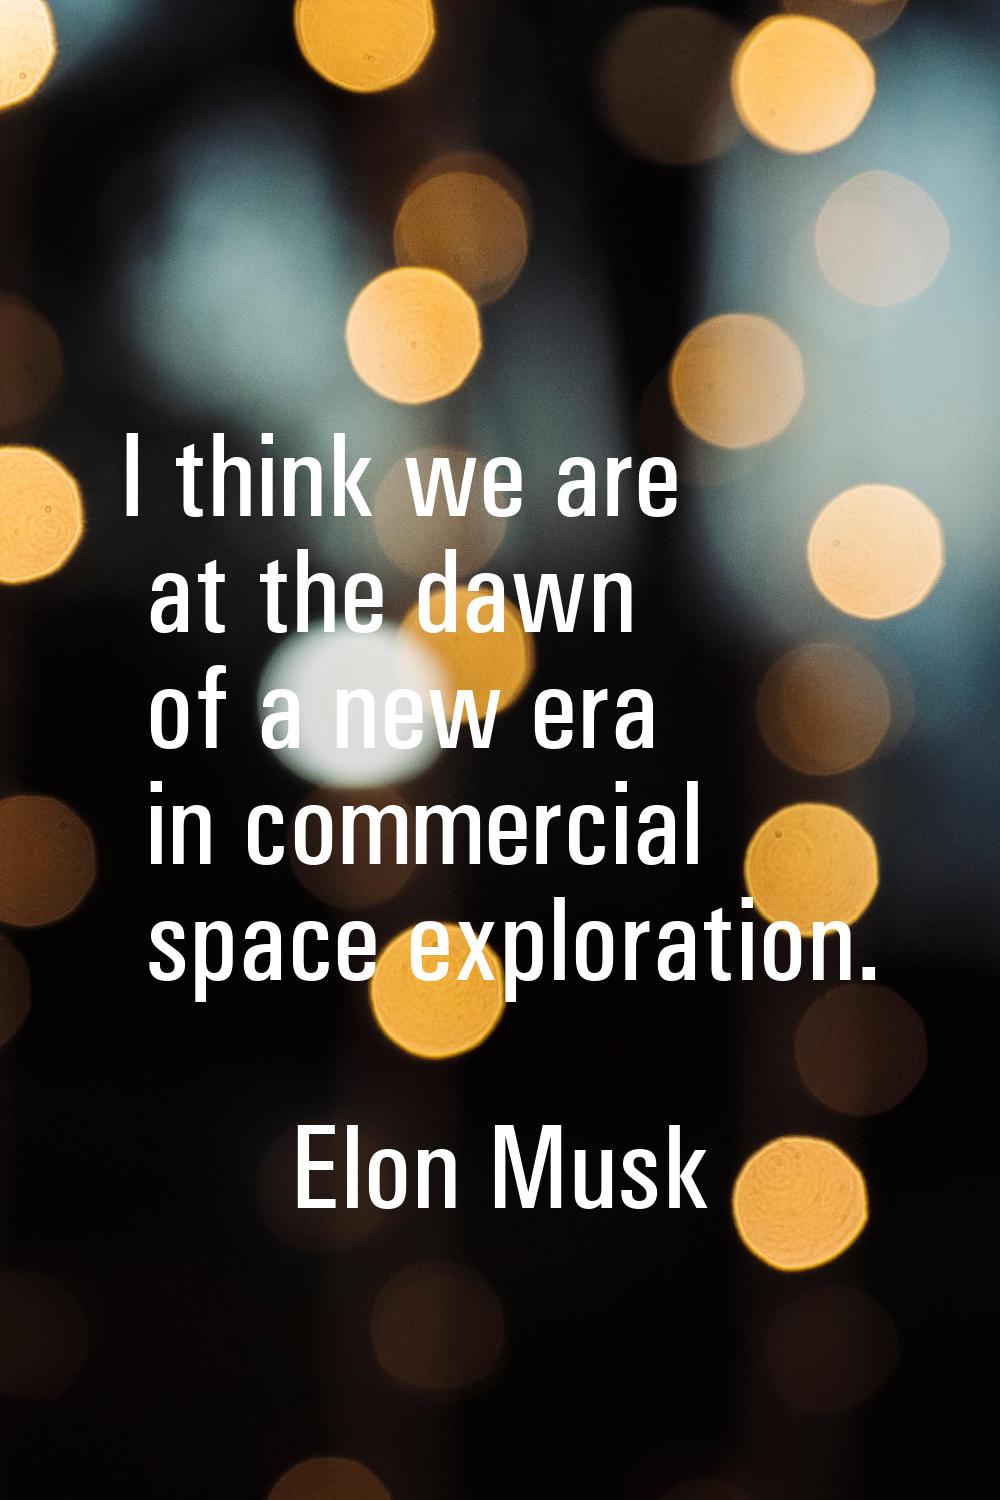 I think we are at the dawn of a new era in commercial space exploration.